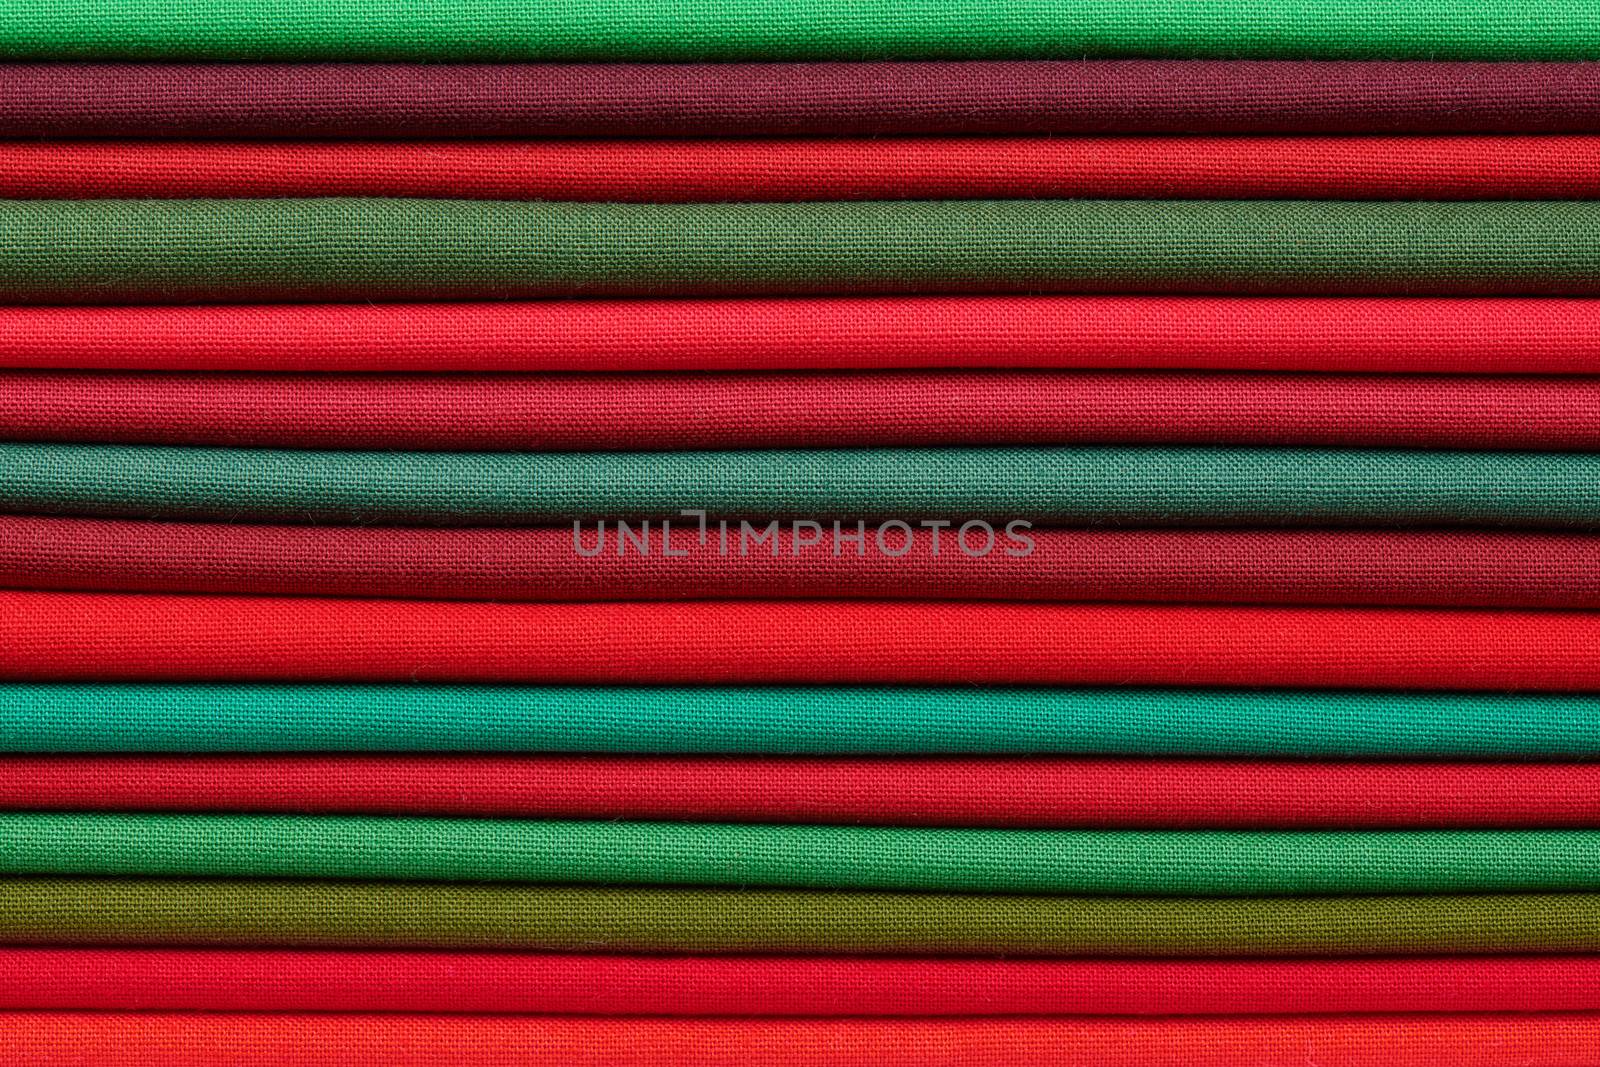 Stack of red and green fabrics as a vibrant background image